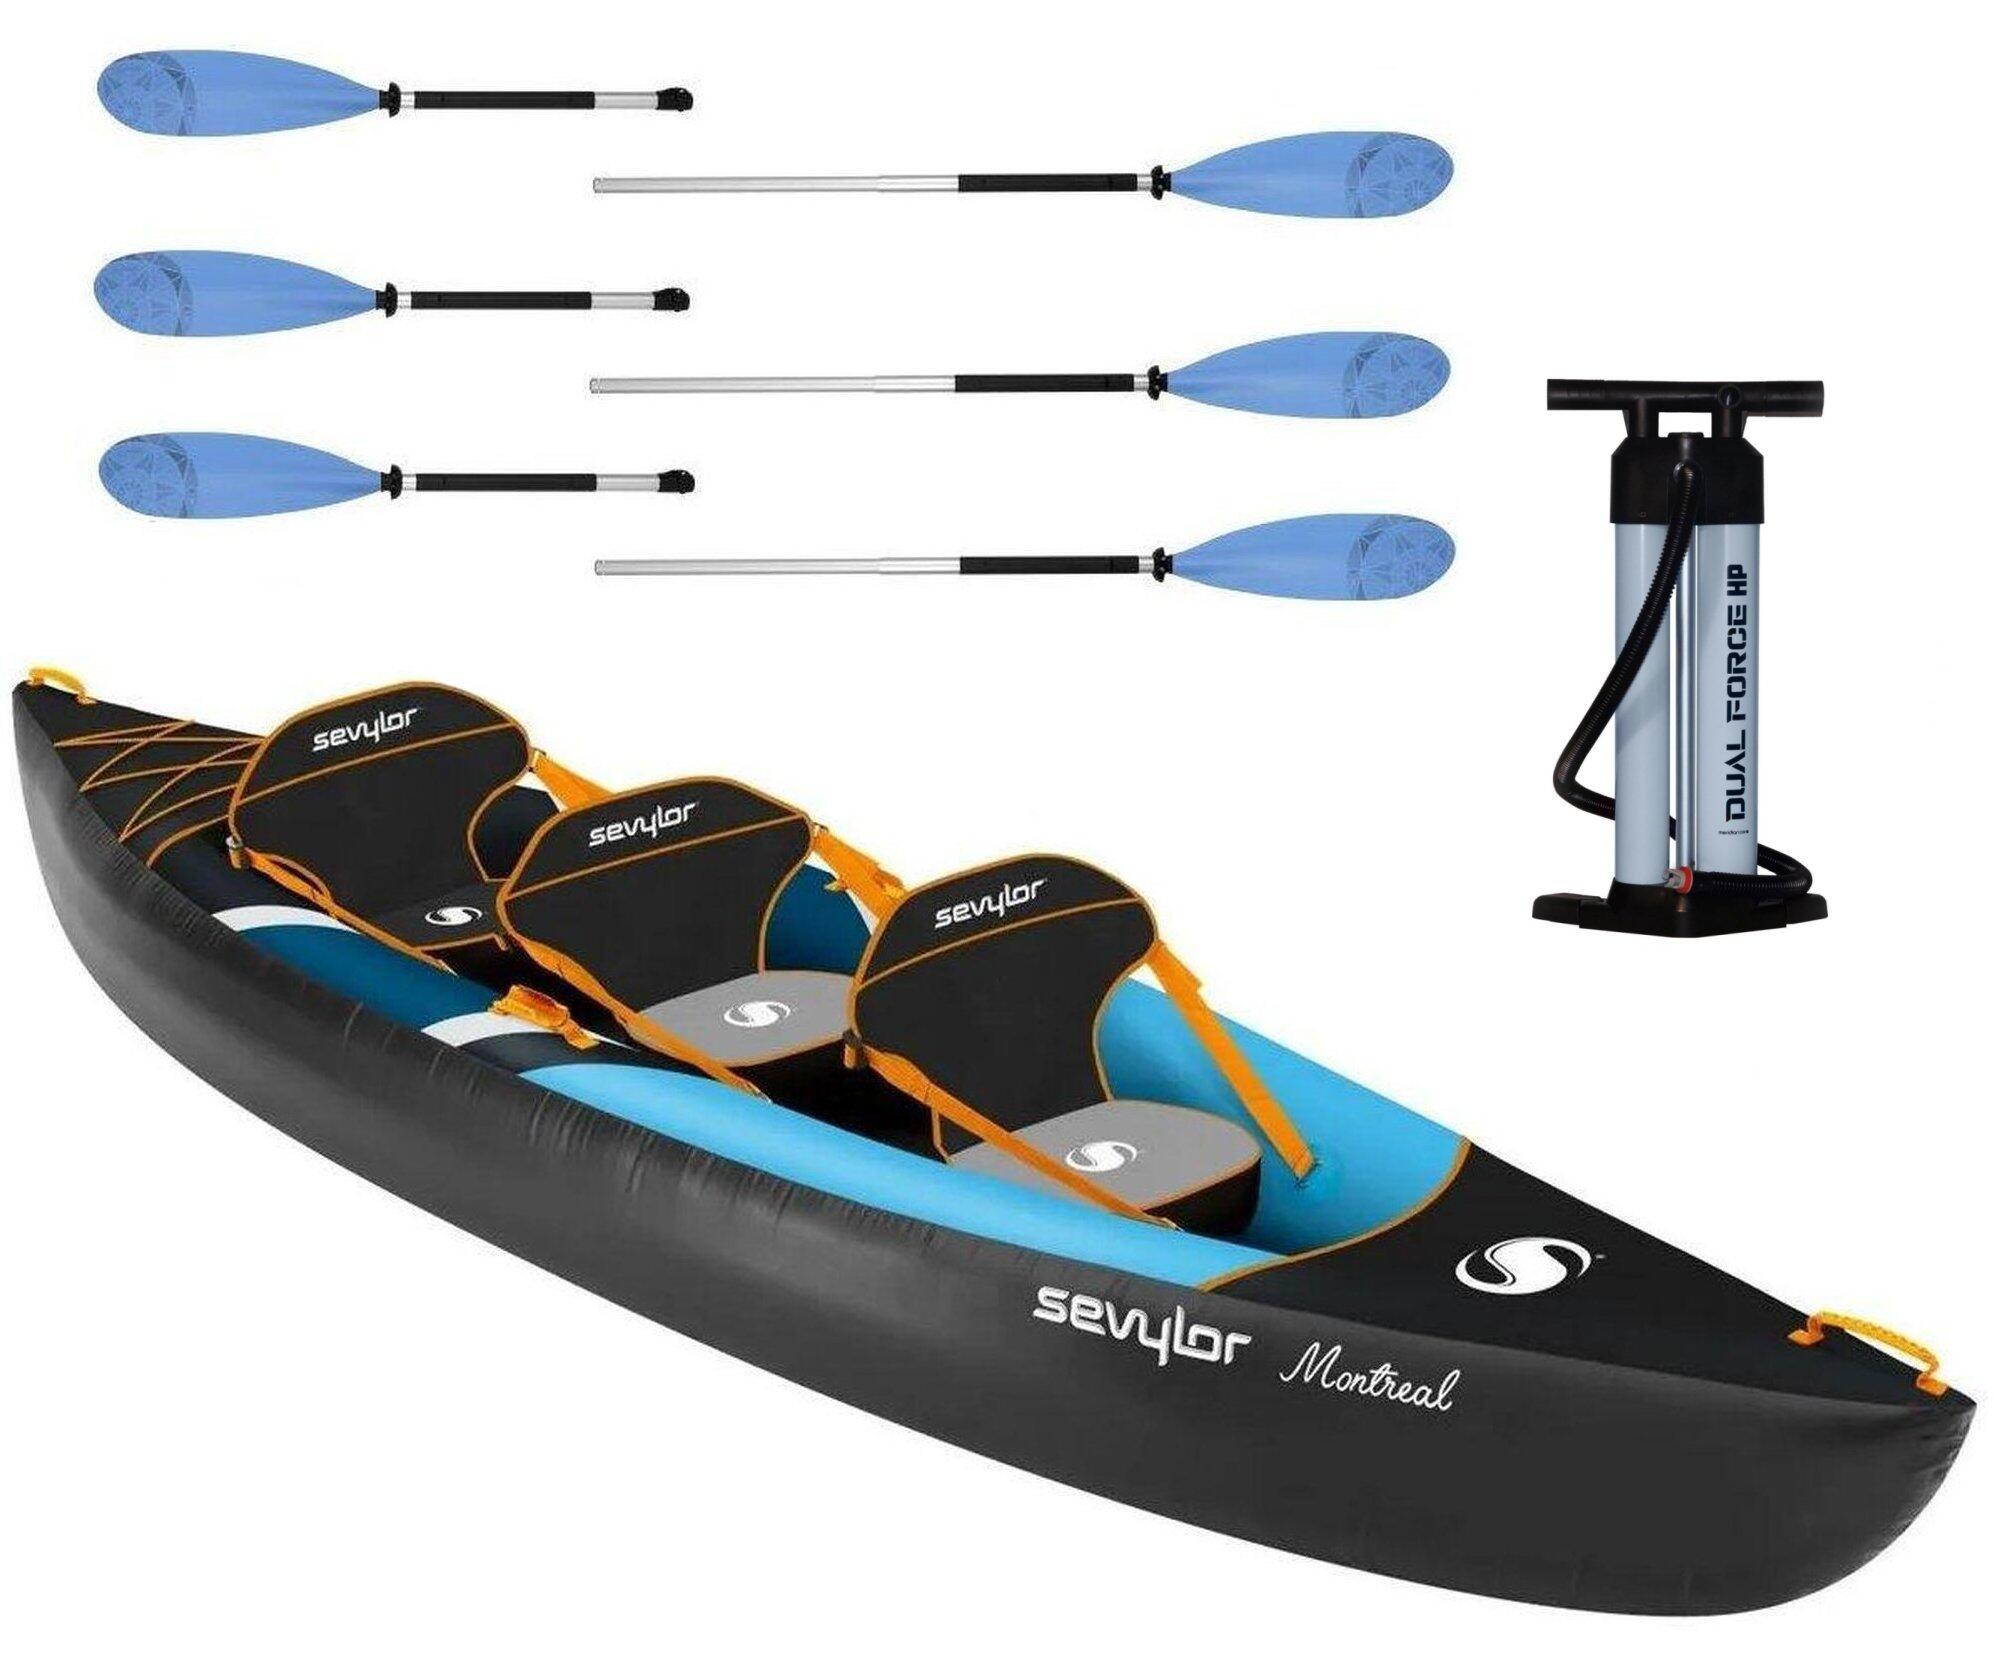 SEVYLOR Montreal 3 Person inflatable Kayak kit with Paddles & Pump - Blue / Black